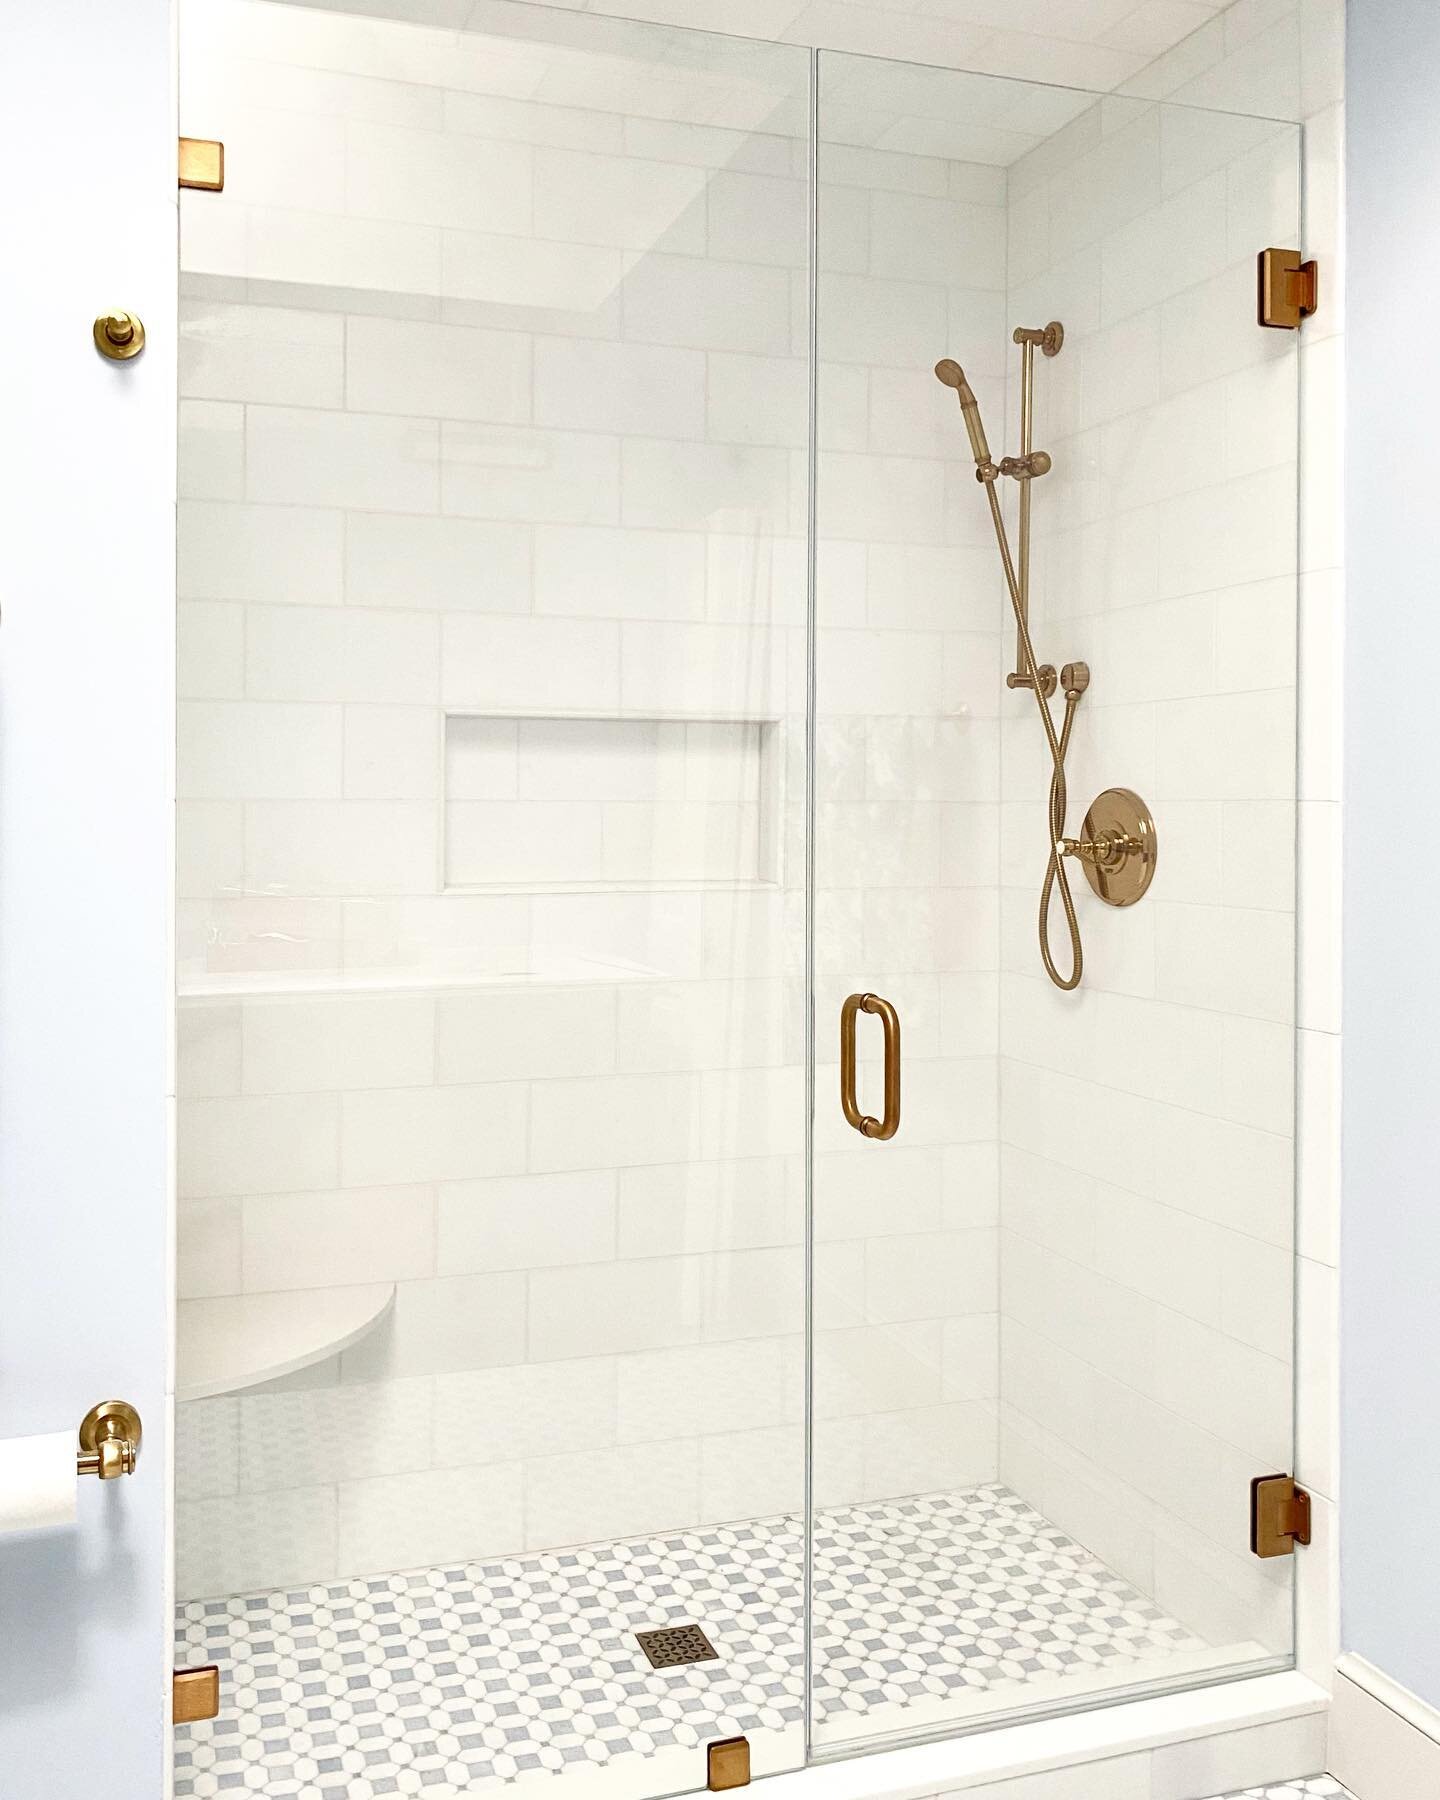 3/8&rdquo; Low Iron (ultra-clear glass) w/ satin brass hardware. Always a great glass selection when a light color tile is being used to get the best clarity of glass.